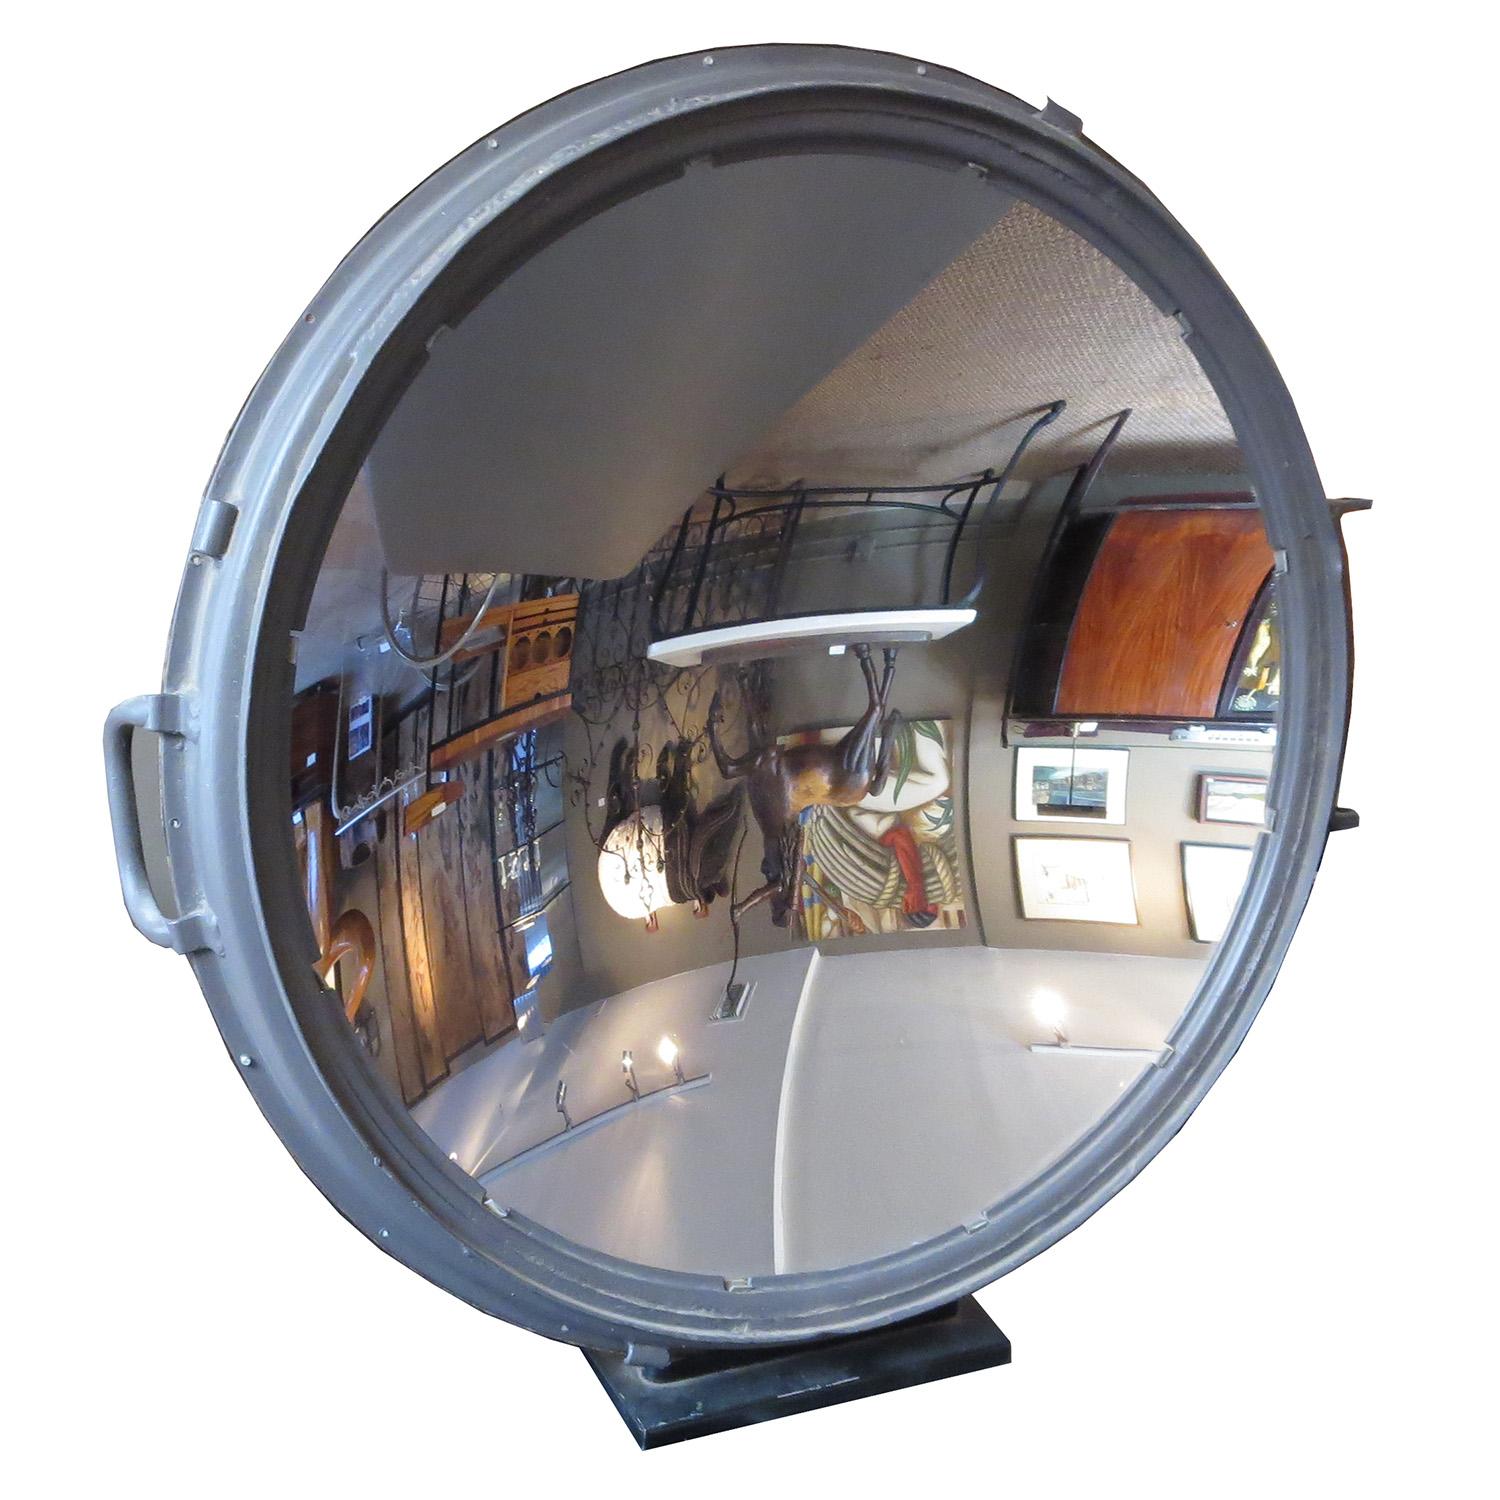 RETIREMENT SALE!!! EVERYTHING MUST GO - CHECK OUT OUR OTHER ITEMS.	

	Parabolic mirrors were concave reflective surfaces used to project energy such as light, sound, or radio waves. They were used in telescopes and scientific machines. In radio, the